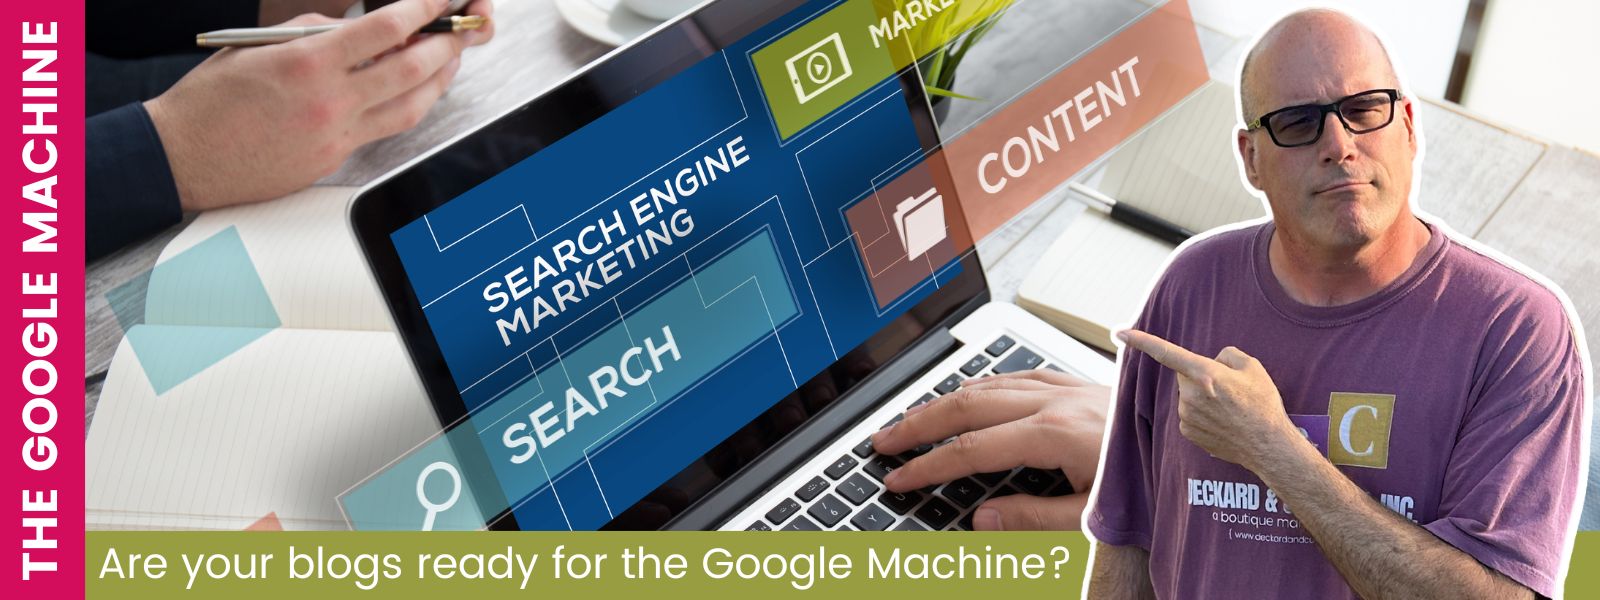 Are your blogs ready for the Google Search Machine? Find out with Deckard & Company, a Bradenton, Sarasota Boutique Marketing and WordPress website design agency.